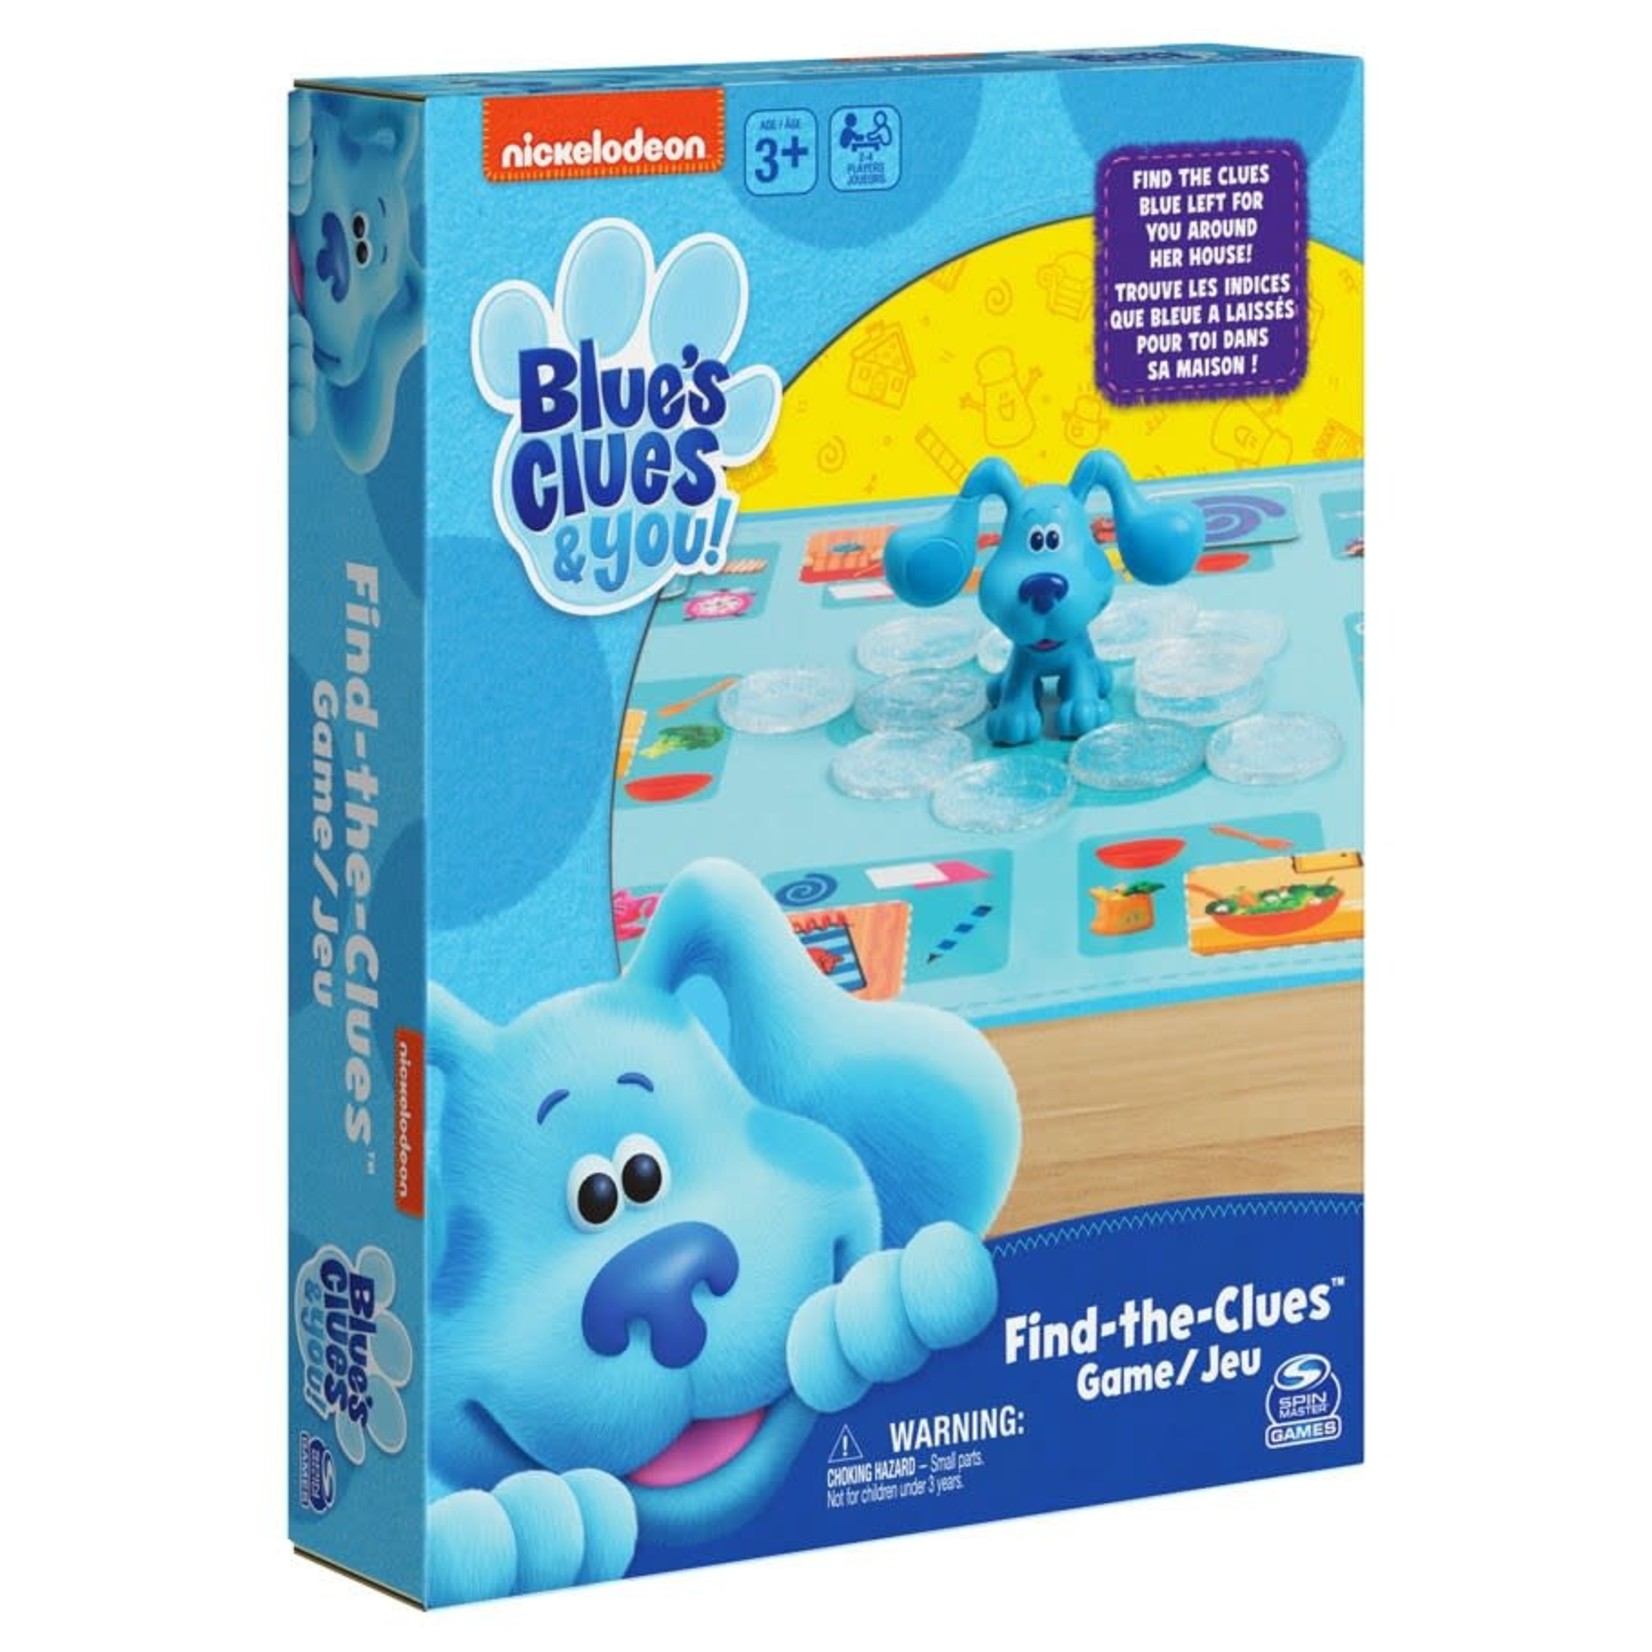 Blue's Clues & You! Find-The-Clues